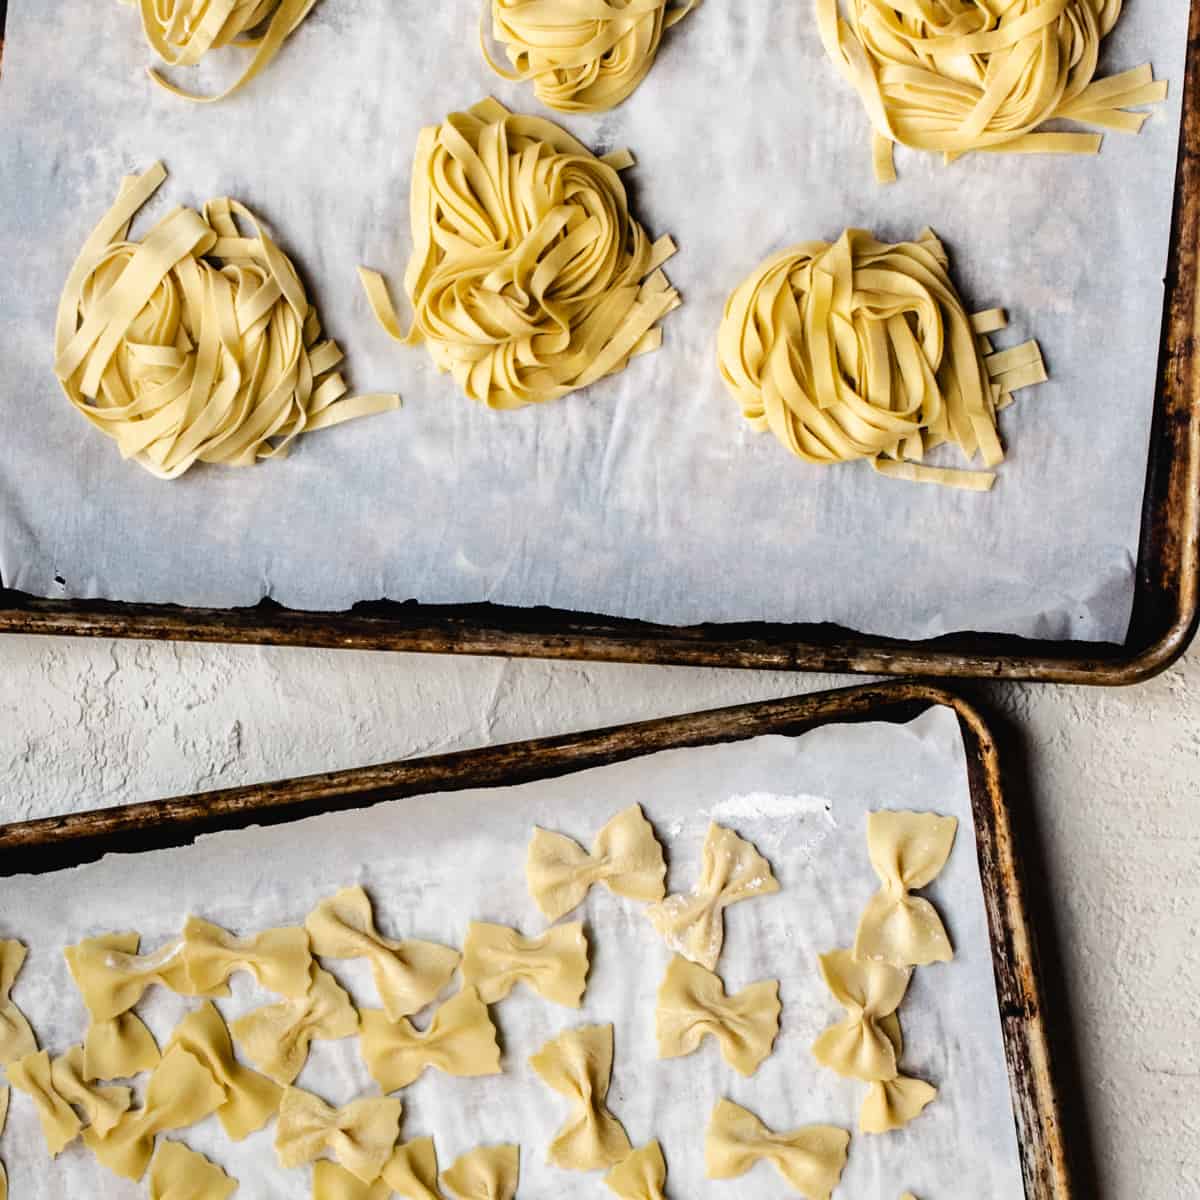 Parchment paper lined baking sheets with fettuccine and farfelle pasta shapes.